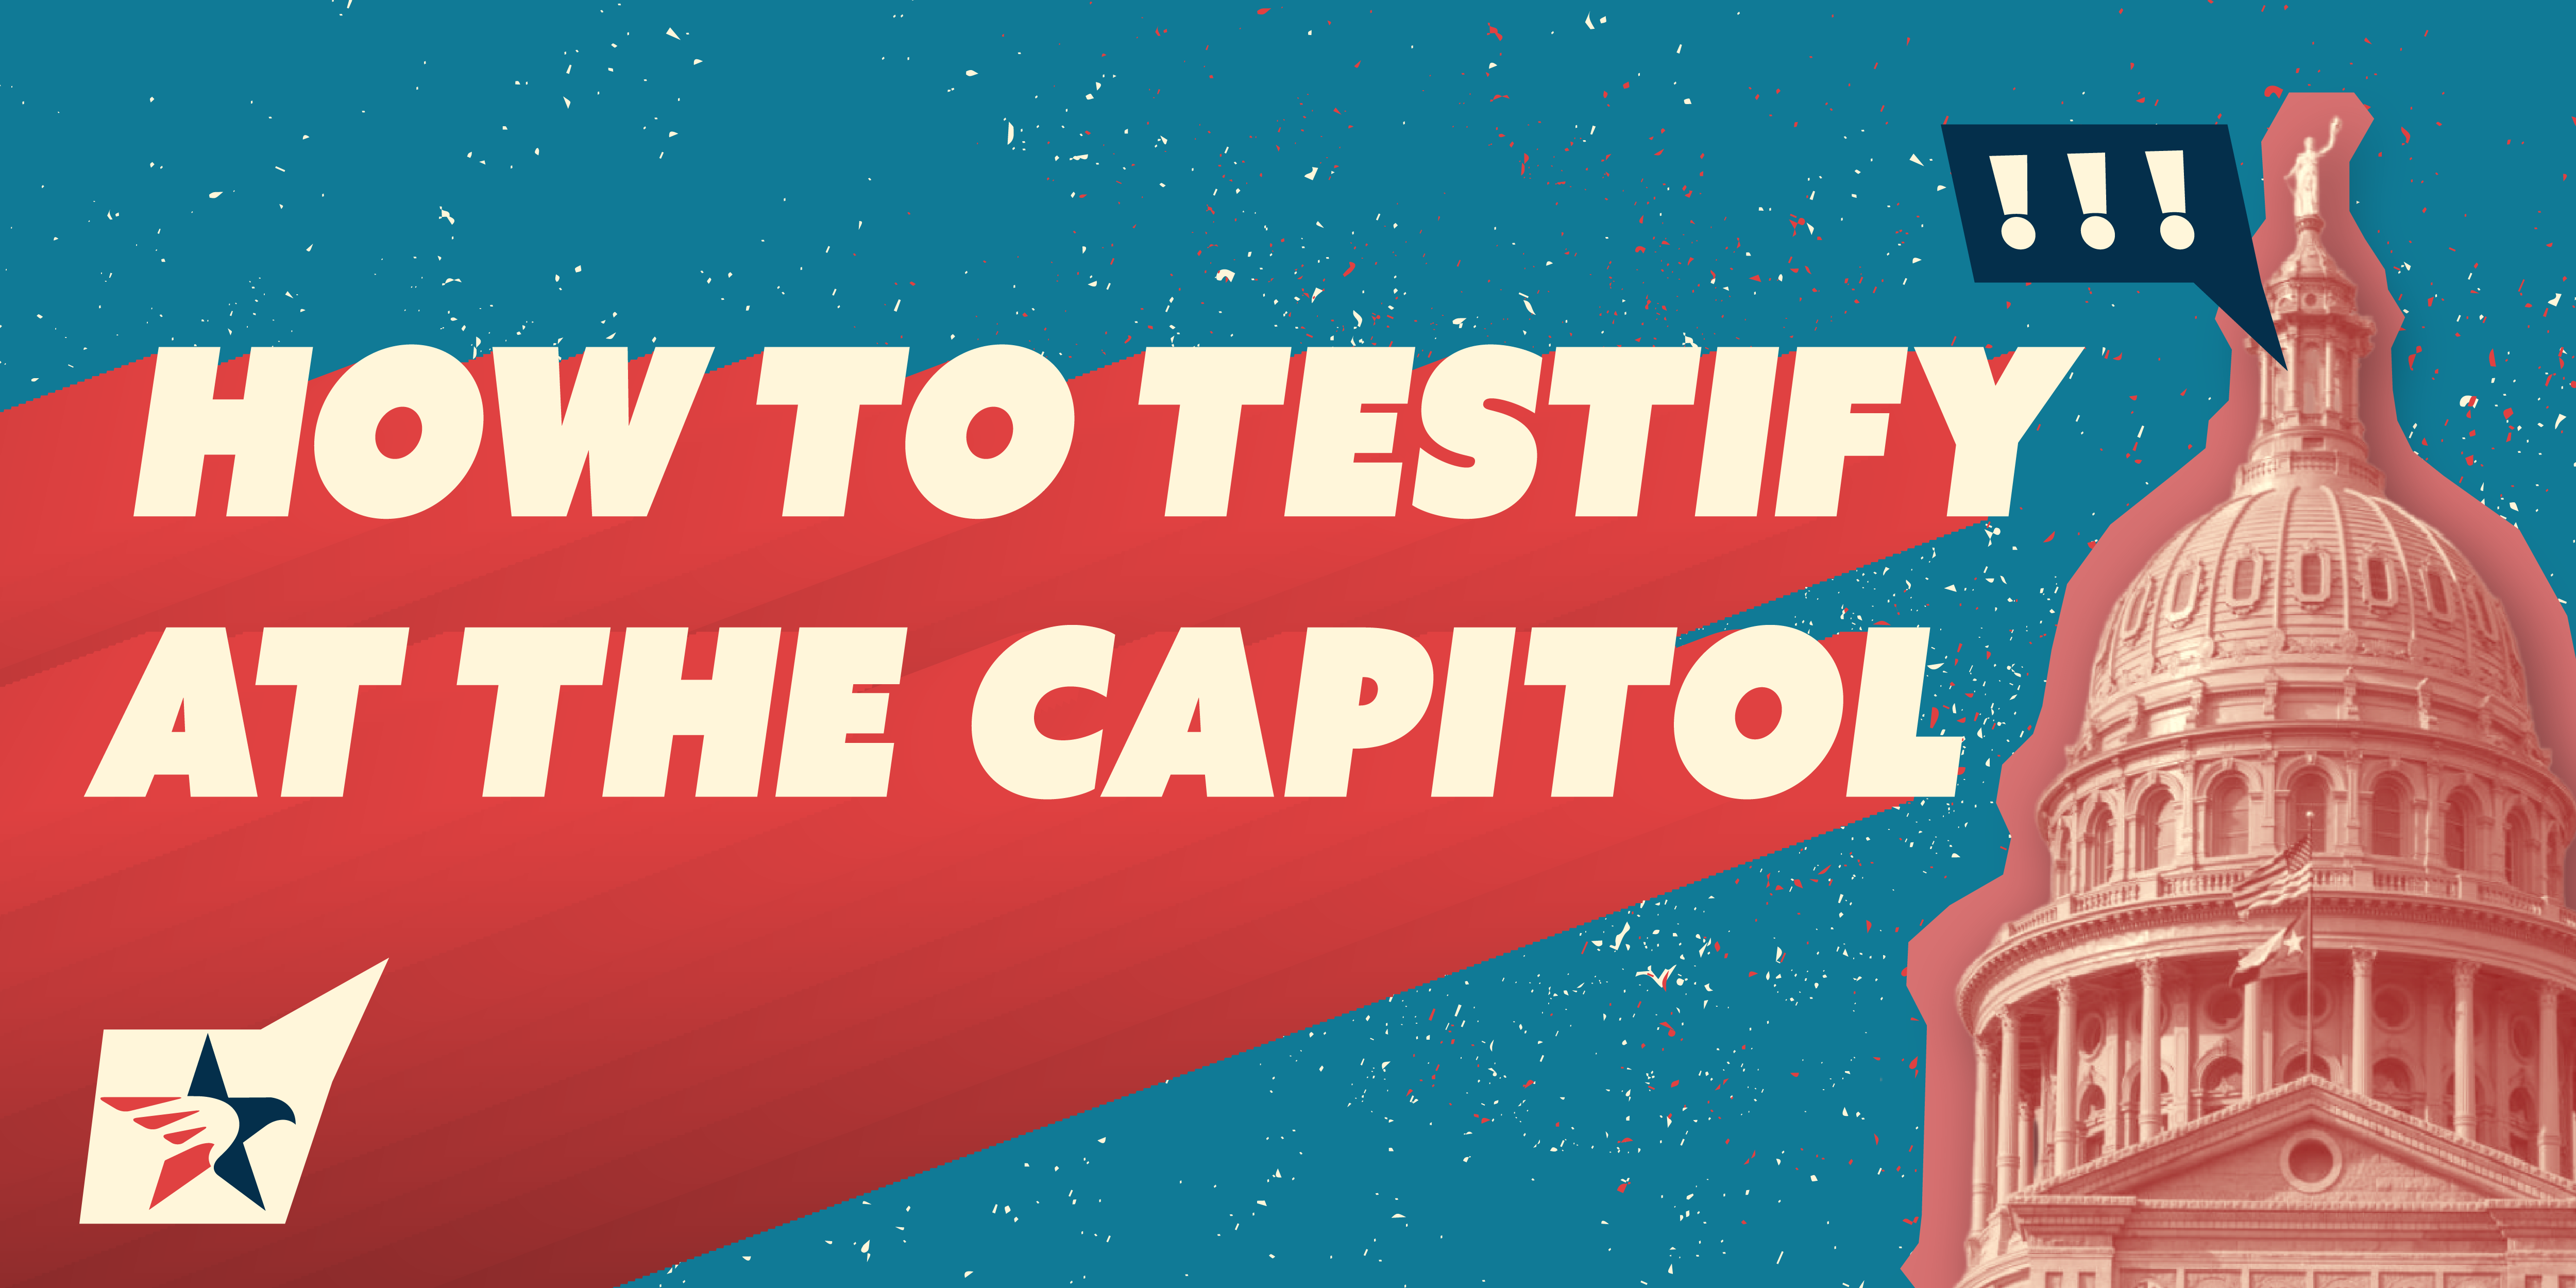 How to testify at the capitol